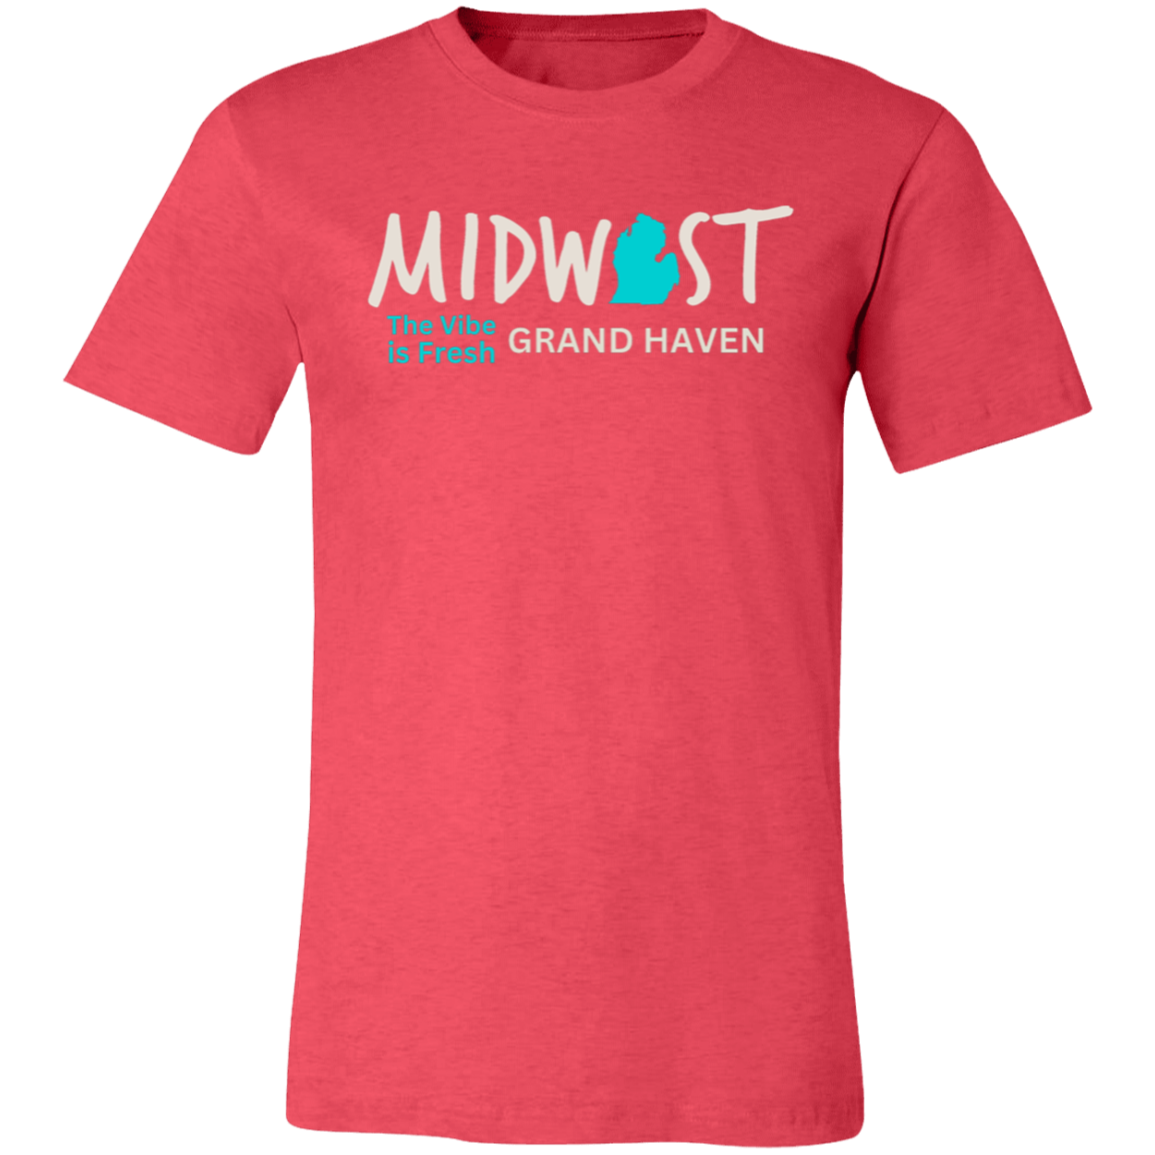 Midwest The Vibe is Fresh Unisex Jersey Tee